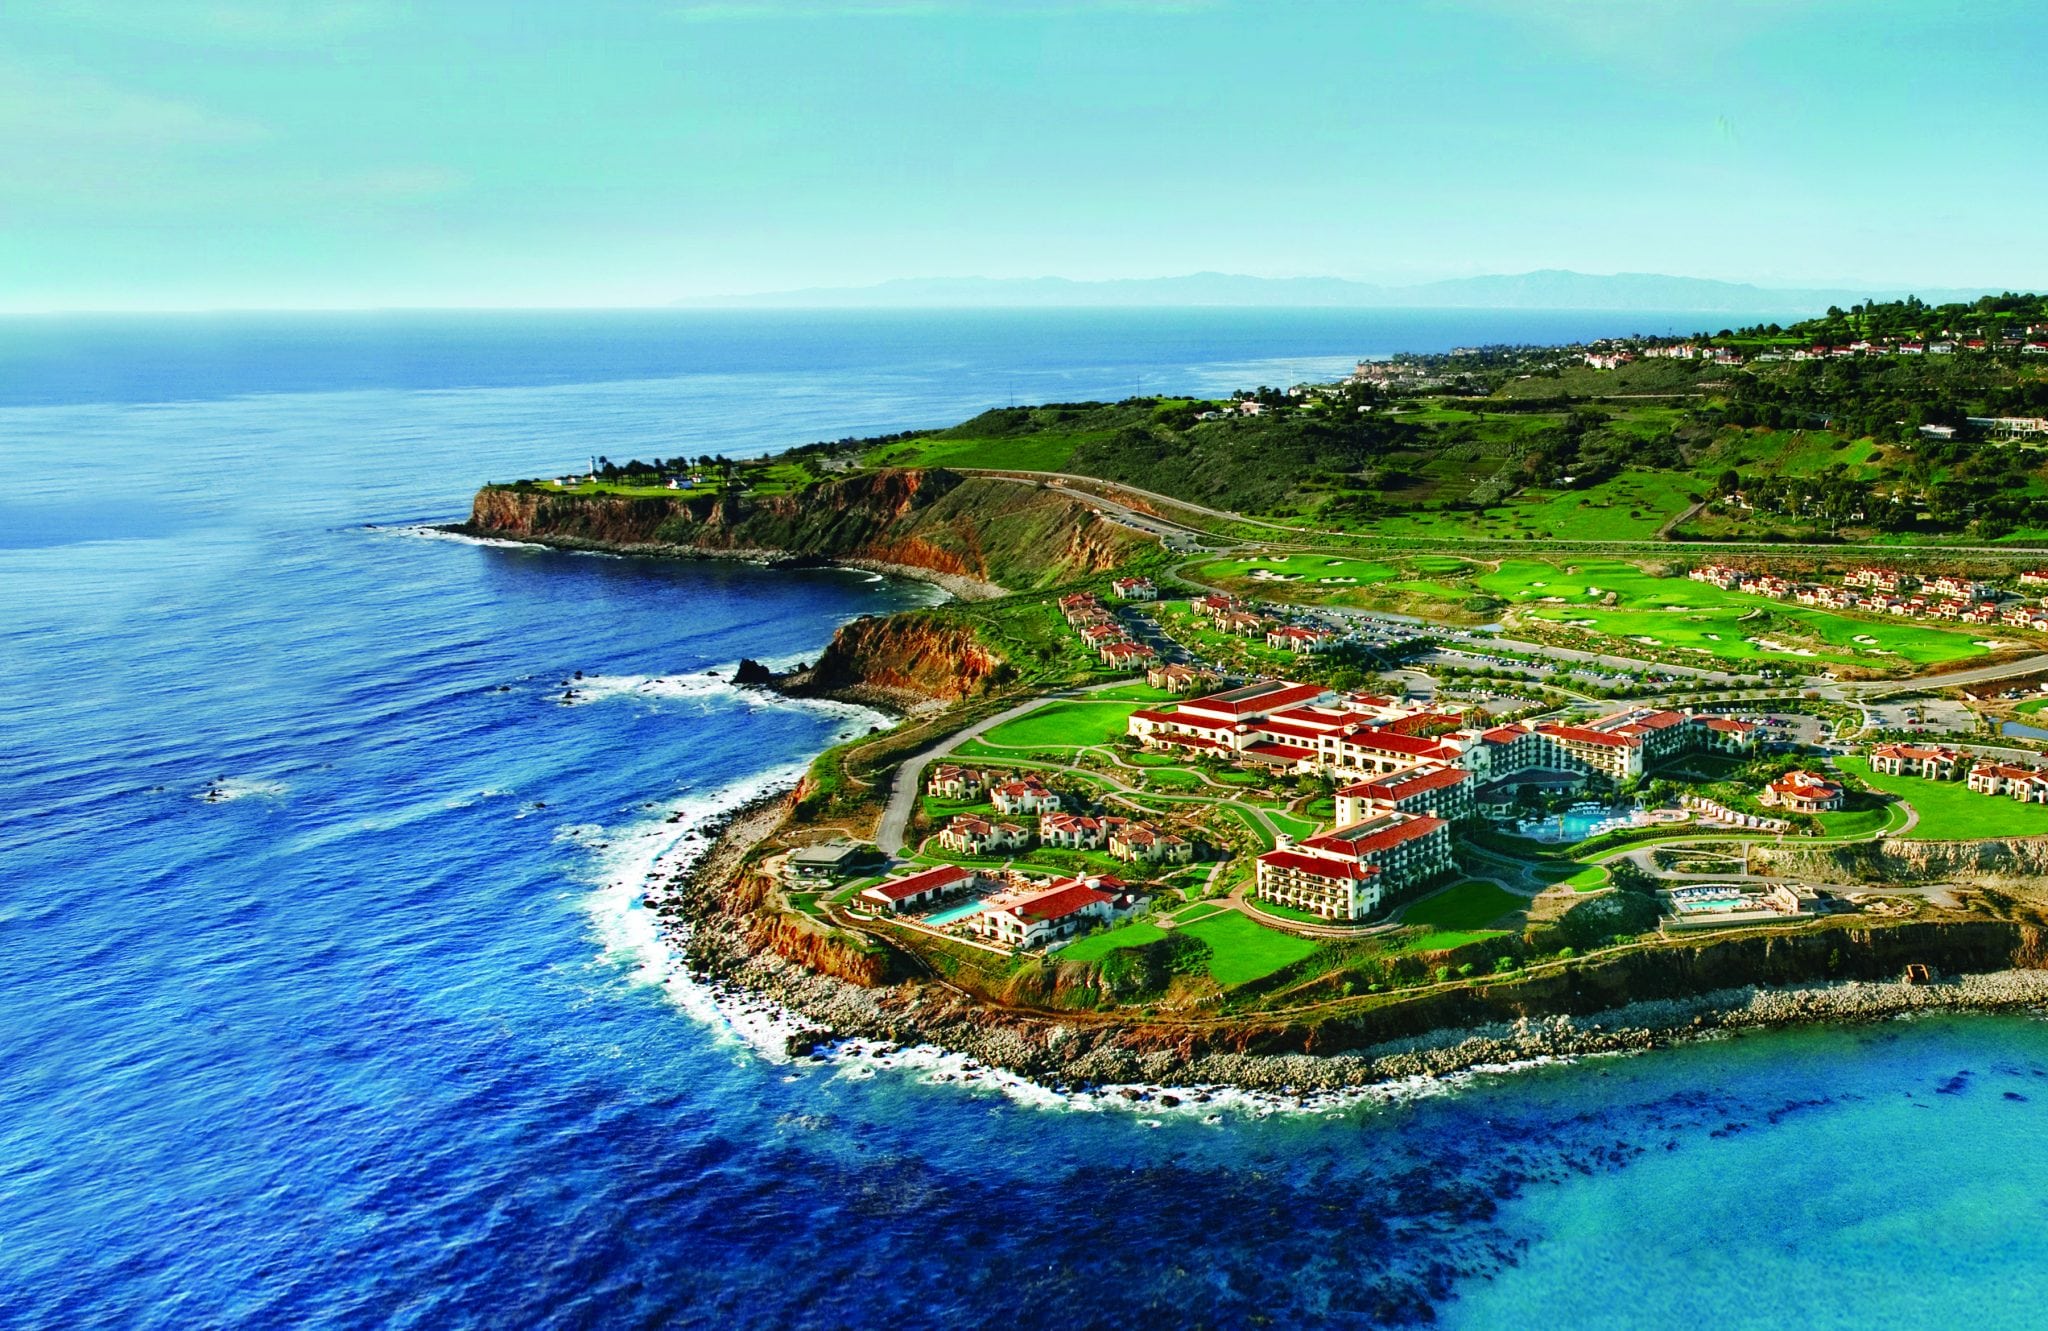 A cliff edge of the Terranea Resort where TV-formed couple Jason Mesnick and Molley Malaney tie the knot. This was the first official union to result from the show.